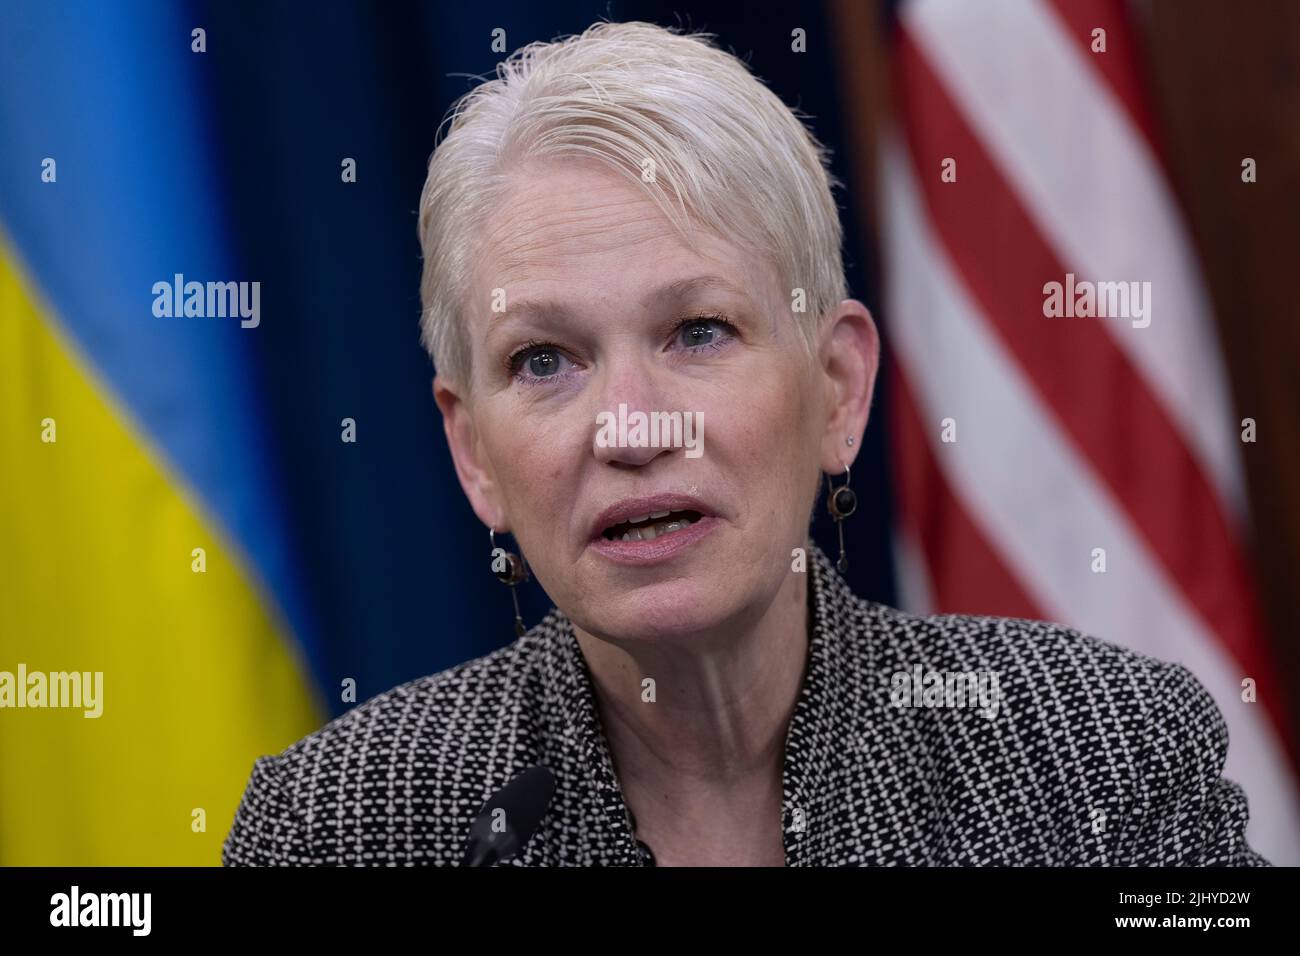 Arlington, United States Of America. 20th July, 2022. Arlington, United States of America. 20 July, 2022. Celeste Wallander, Assistant Secretary of Defense for International Security Affairs remarks during a virtual meeting of the Ukraine Defense Contact Group from the Pentagon, July 20, 2022 in Arlington, Virginia. Credit: Chad J. McNeeley/DOD/Alamy Live News Stock Photo